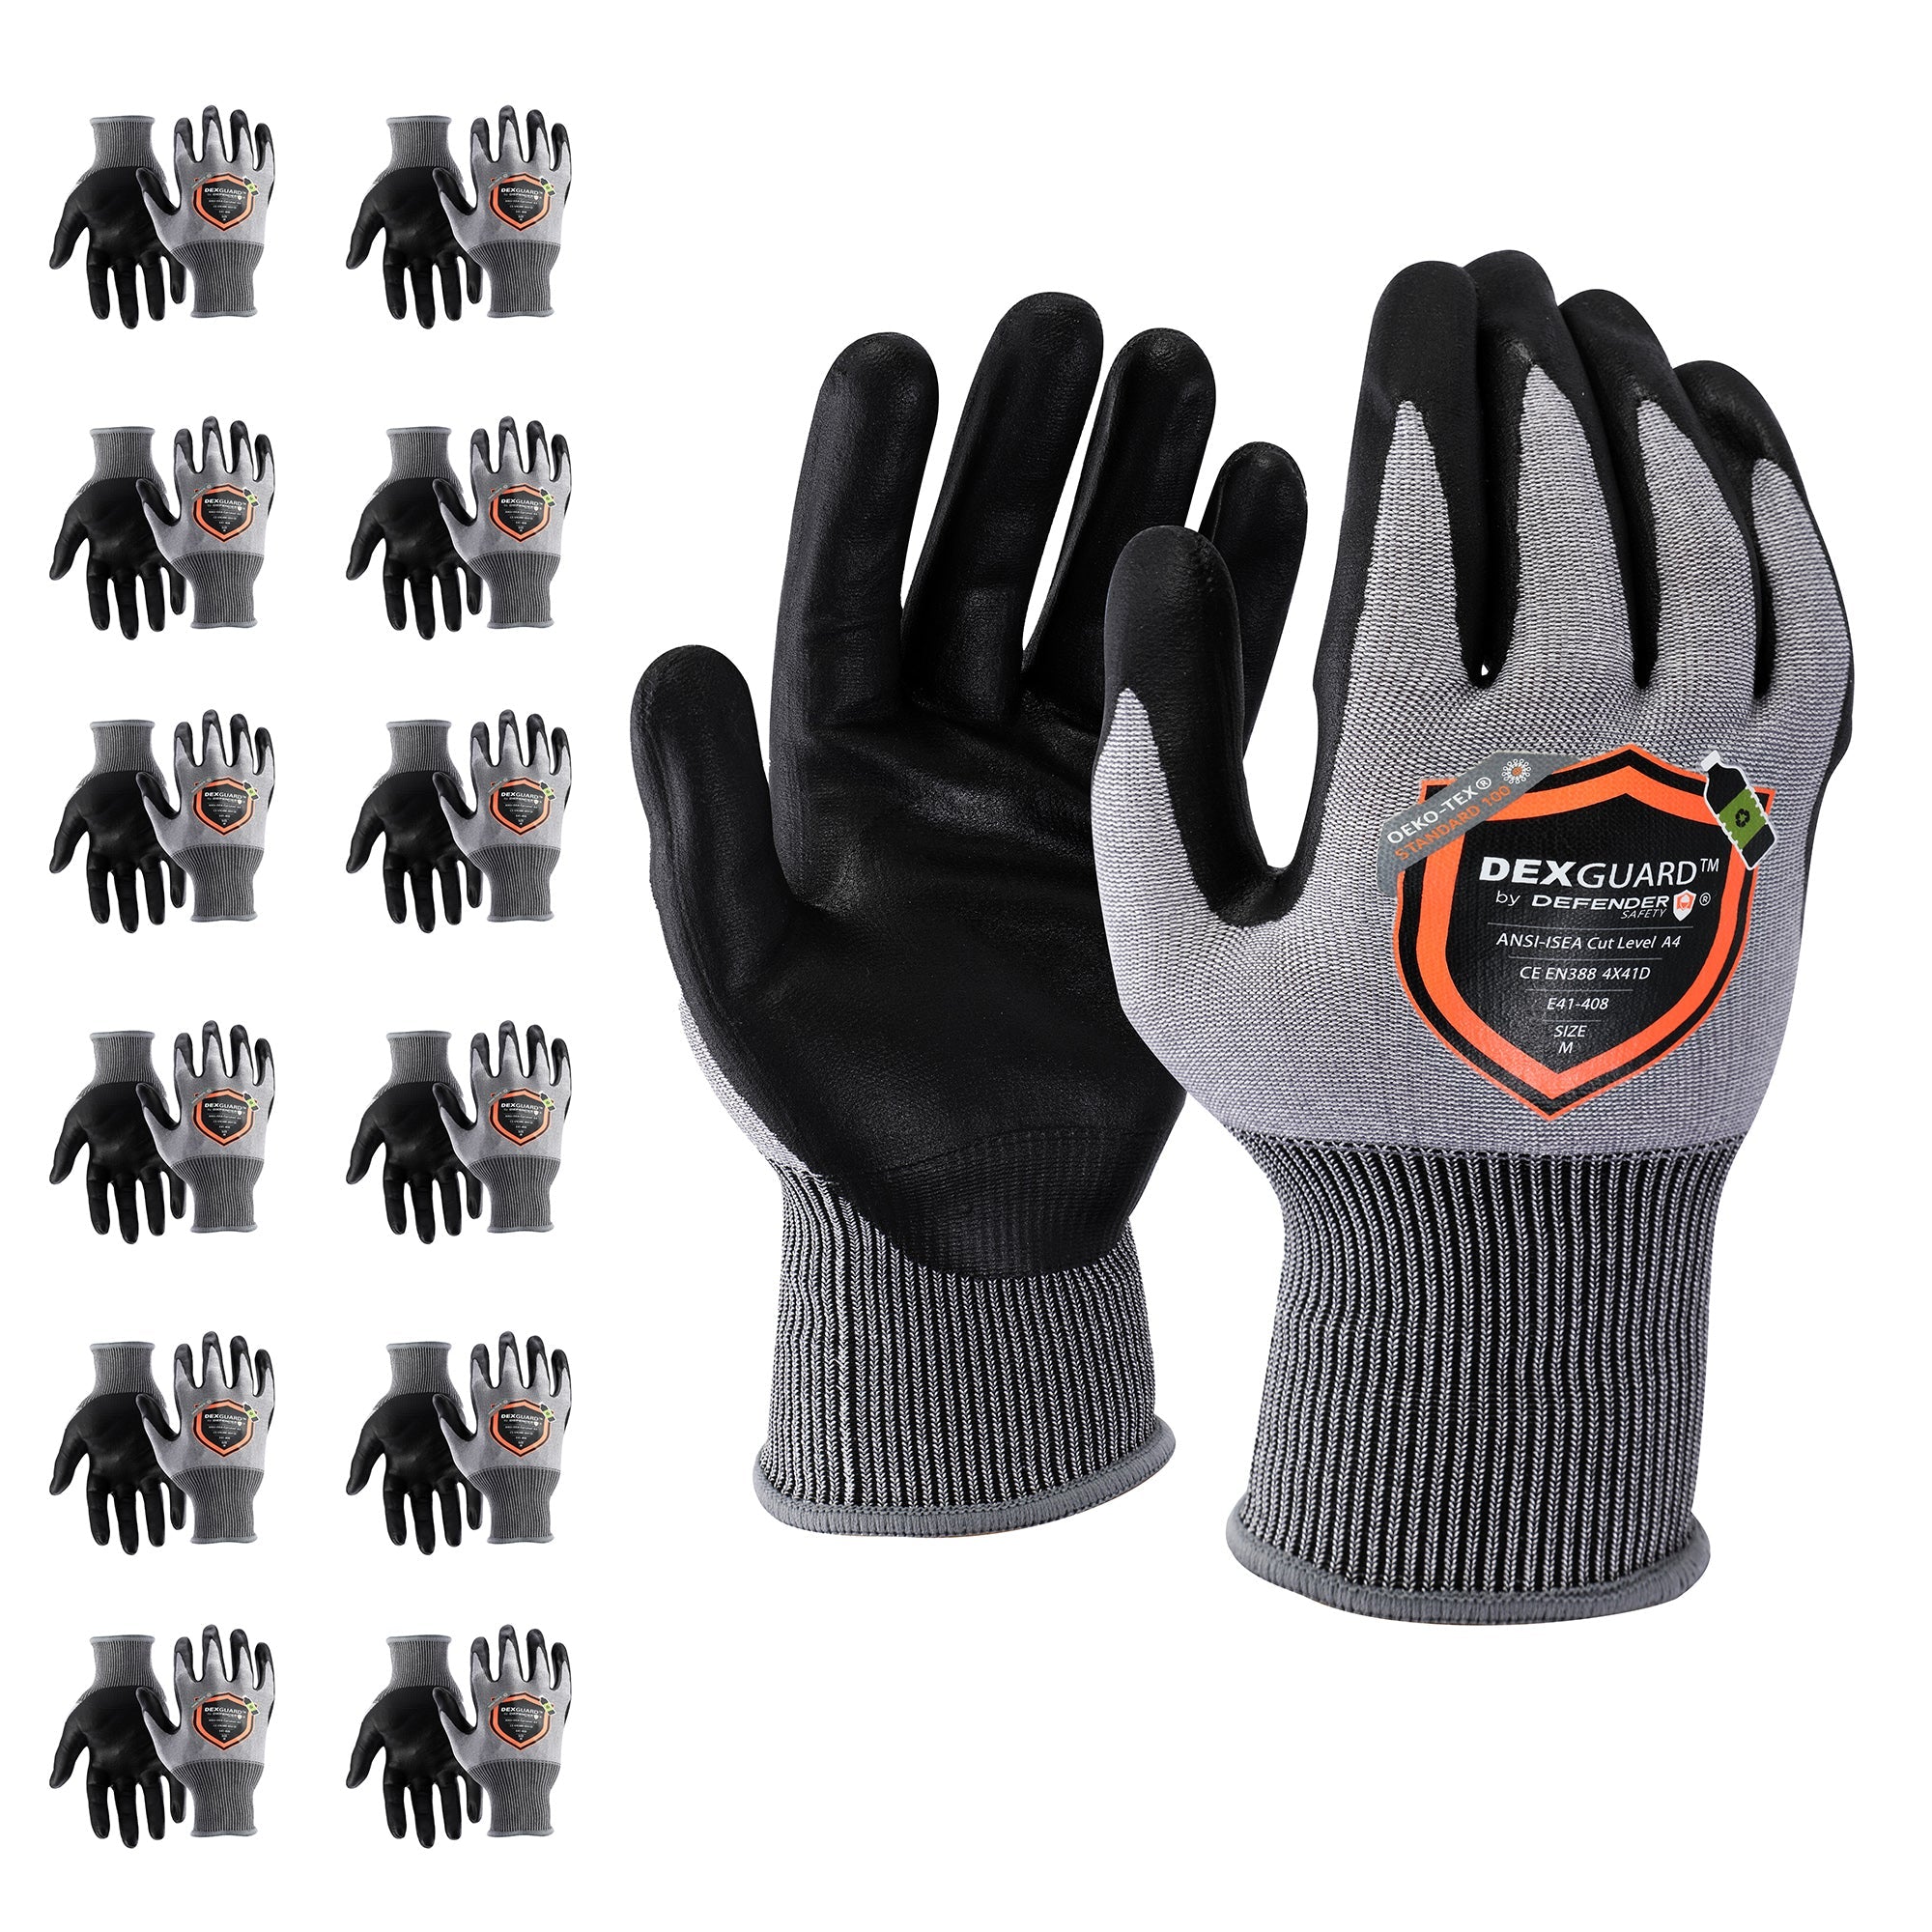 Medium And Large Electrical Shock Proof Safety Hand Gloves